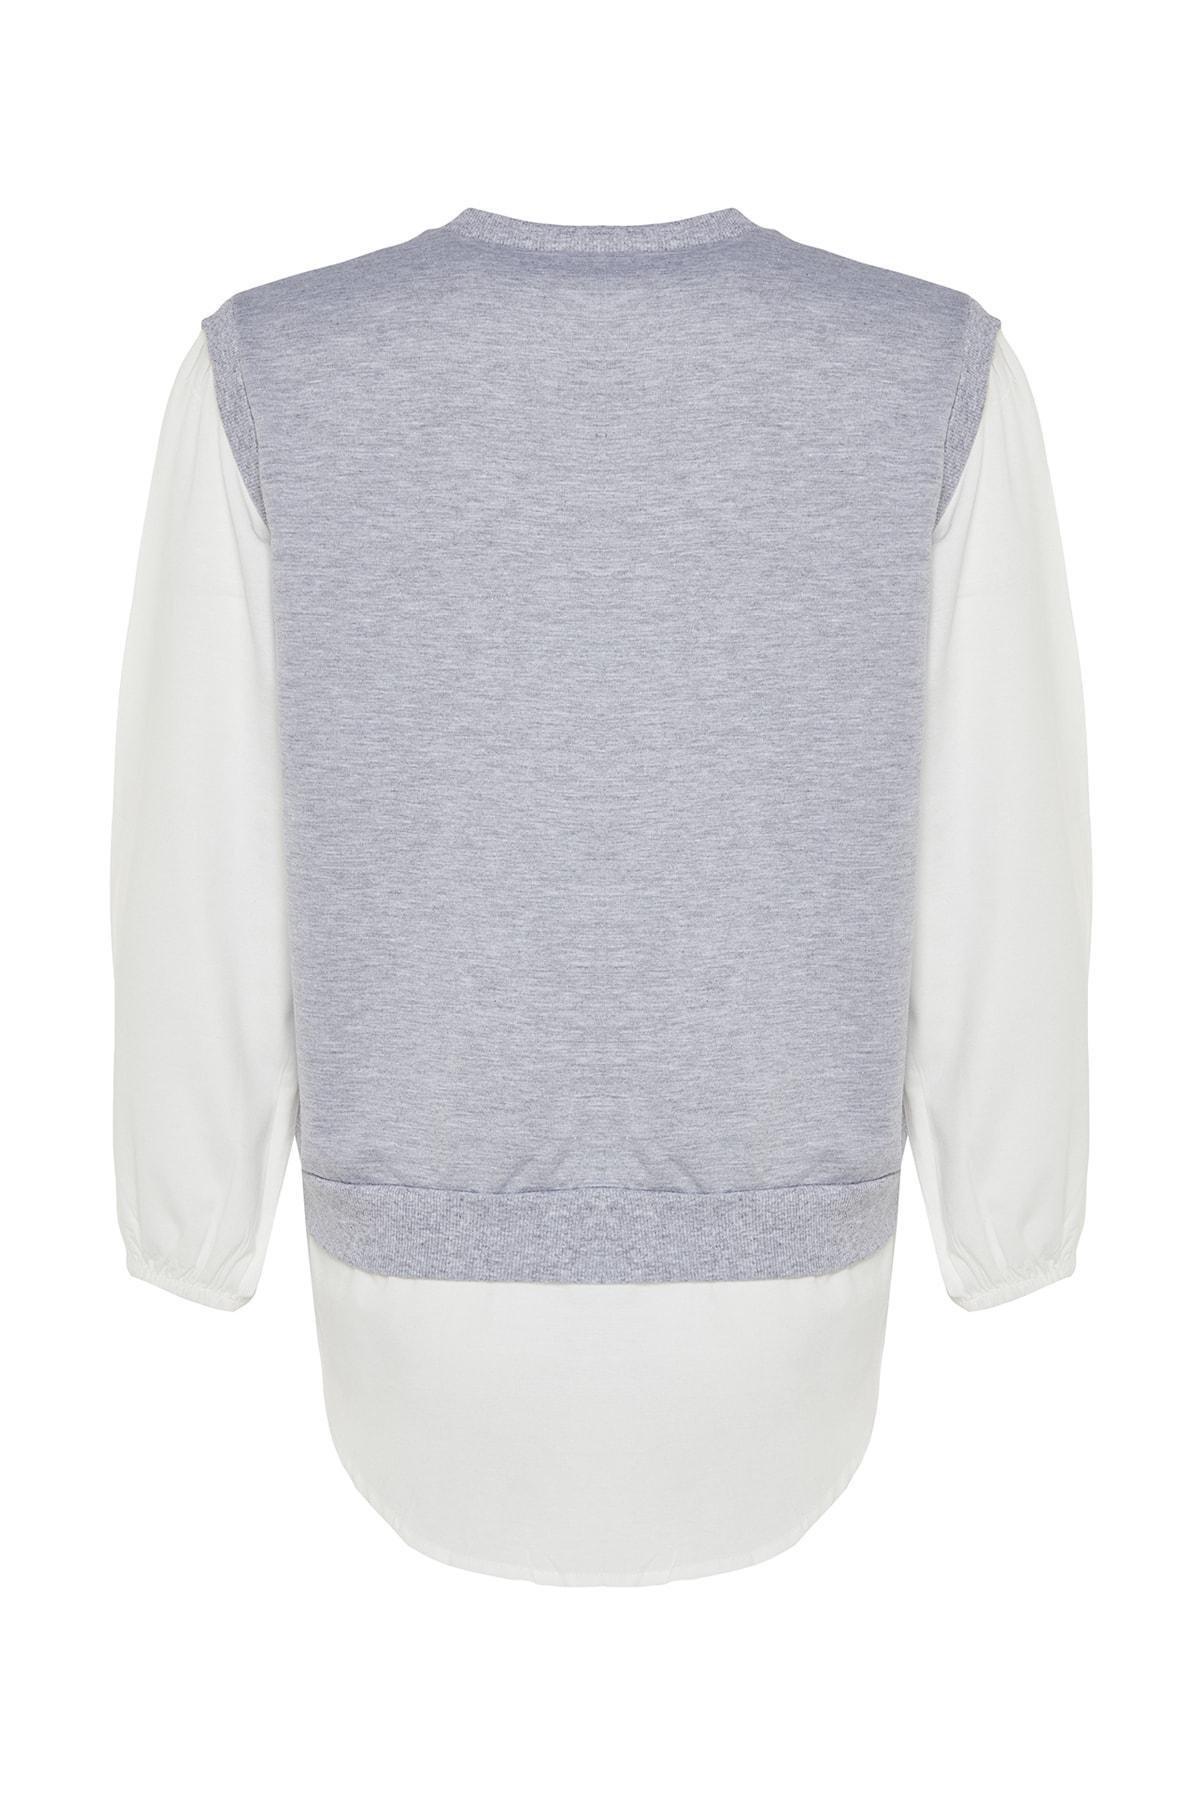 Trendyol - Grey Knitted Tunic Sweater